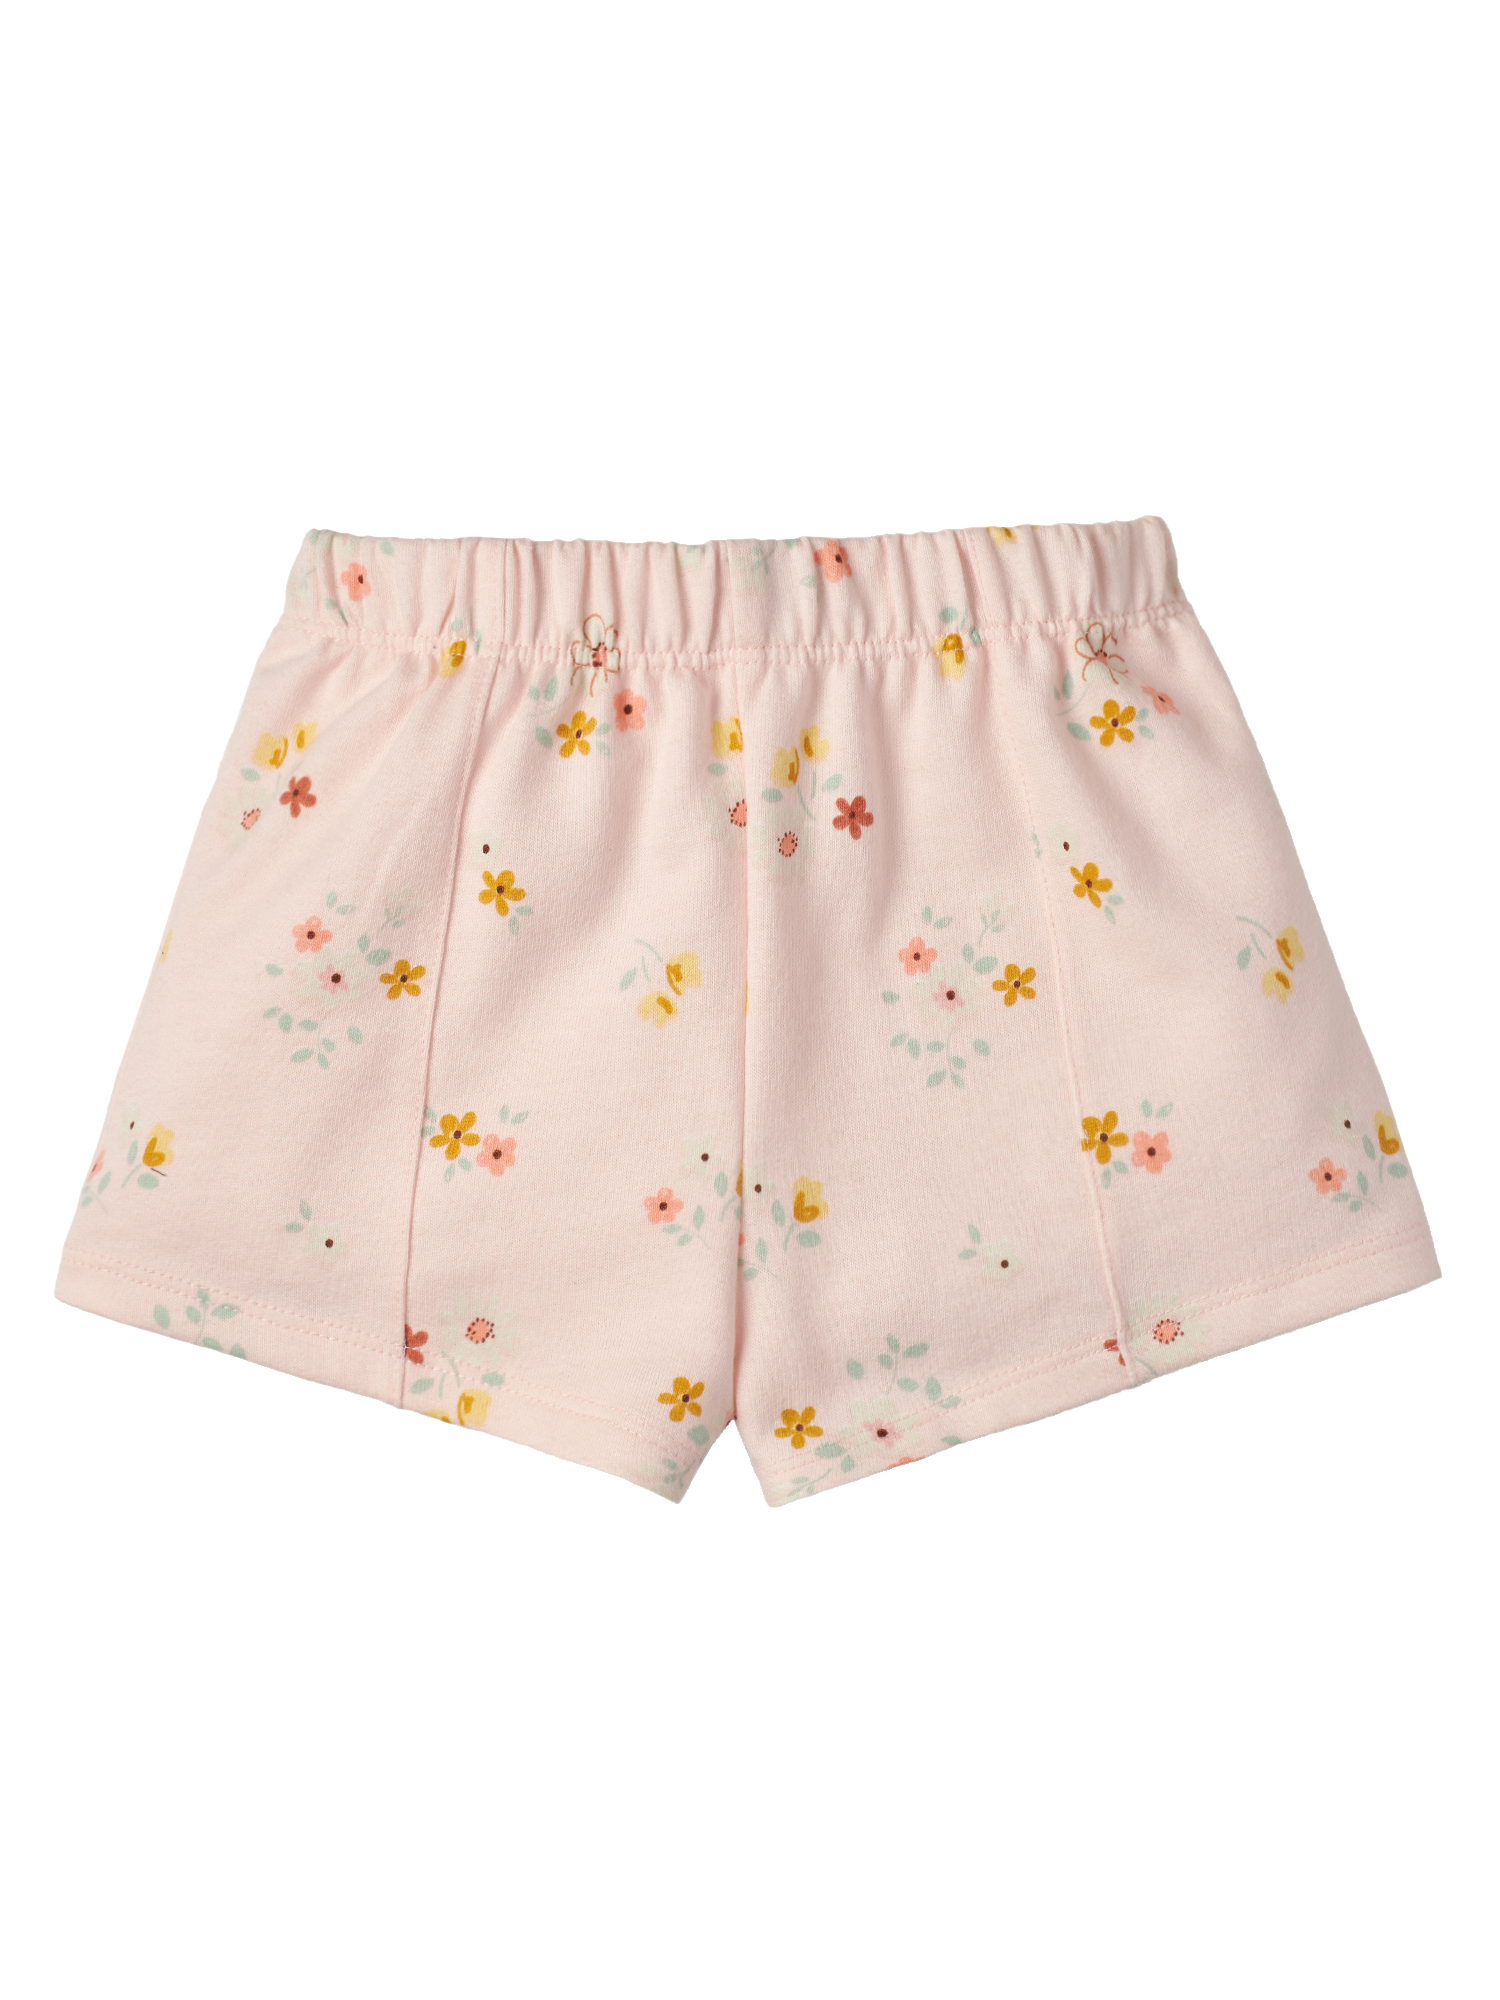 Modern Moments by Gerber Toddler Girl Peached French Terry Shorts, 2-Pack, Sizes 12M-5T - image 4 of 11